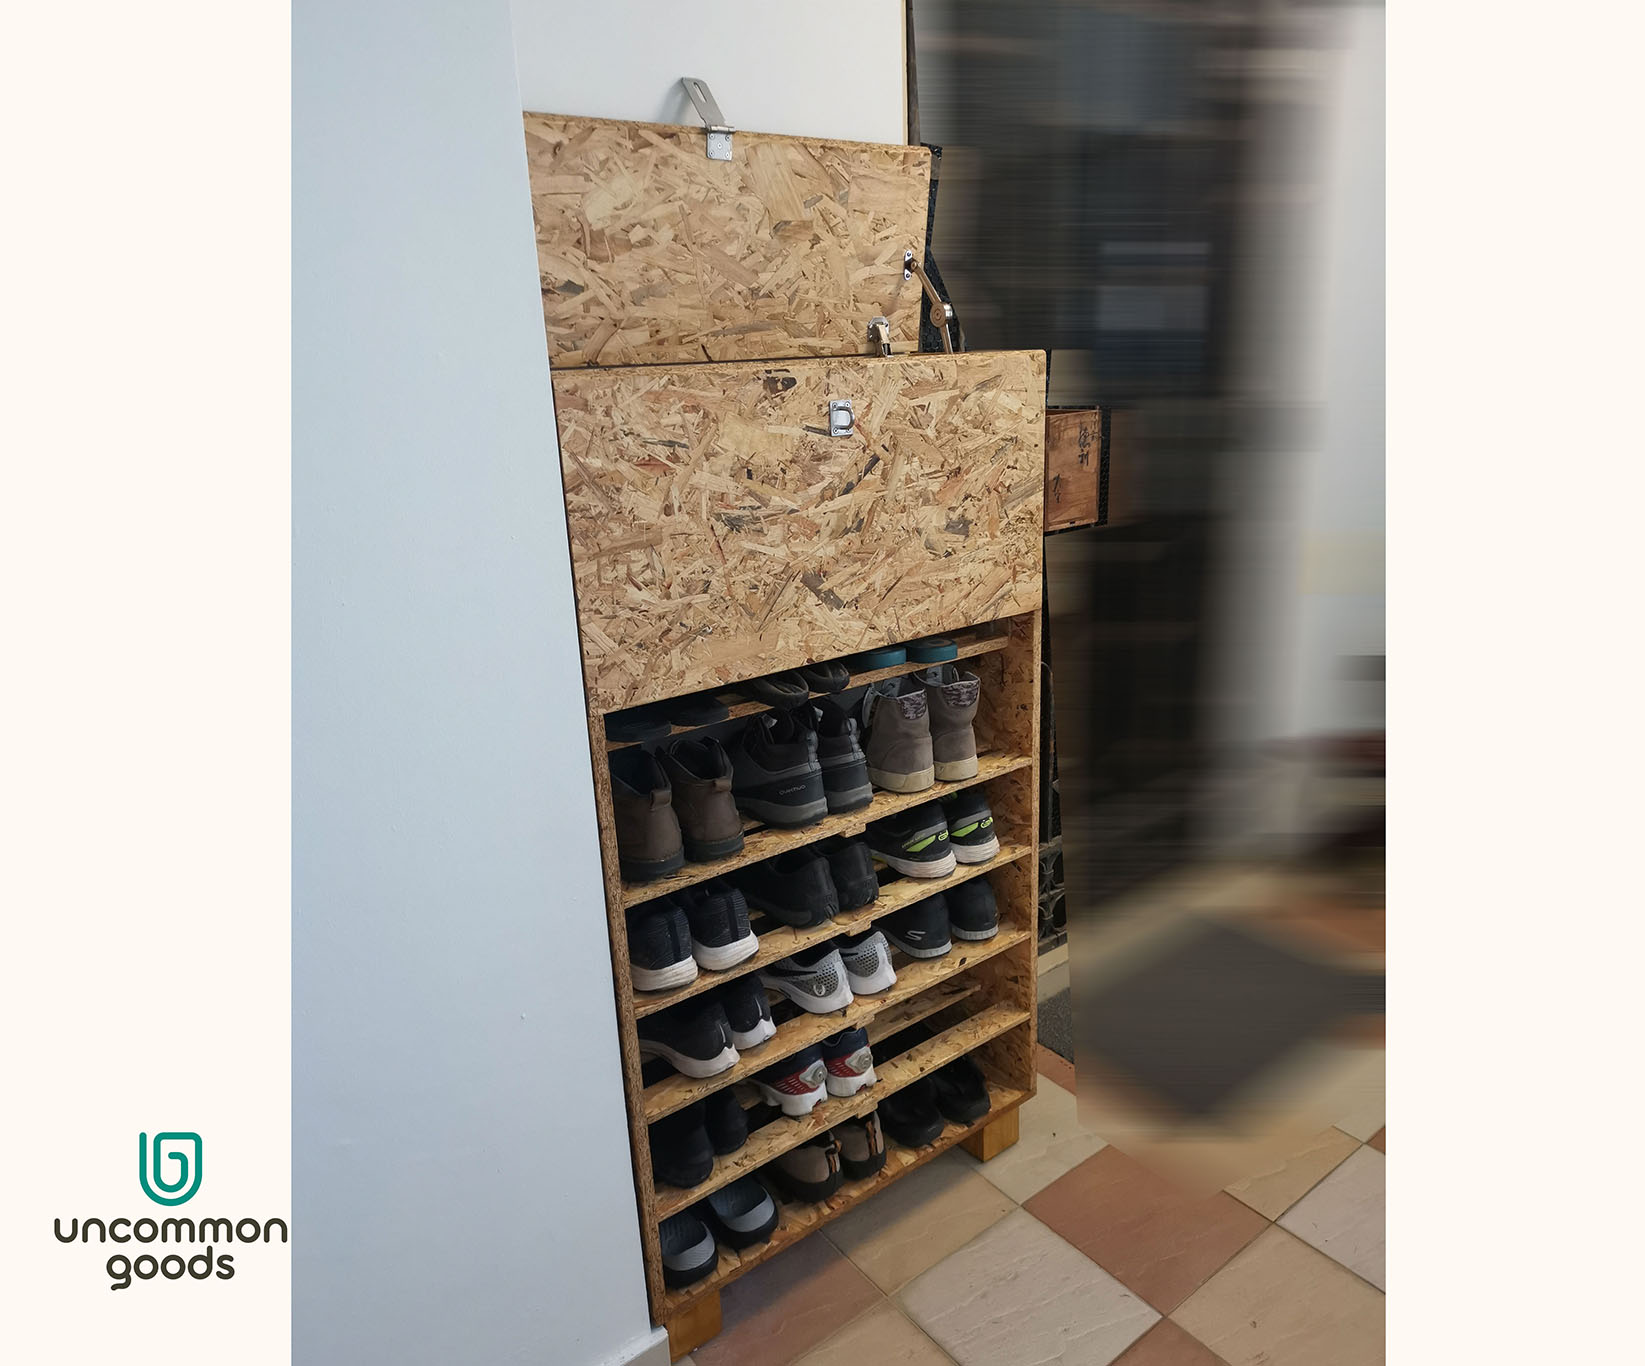 Uncommon Goods Singapore designs and builds a shoe rack with built in parcel locker